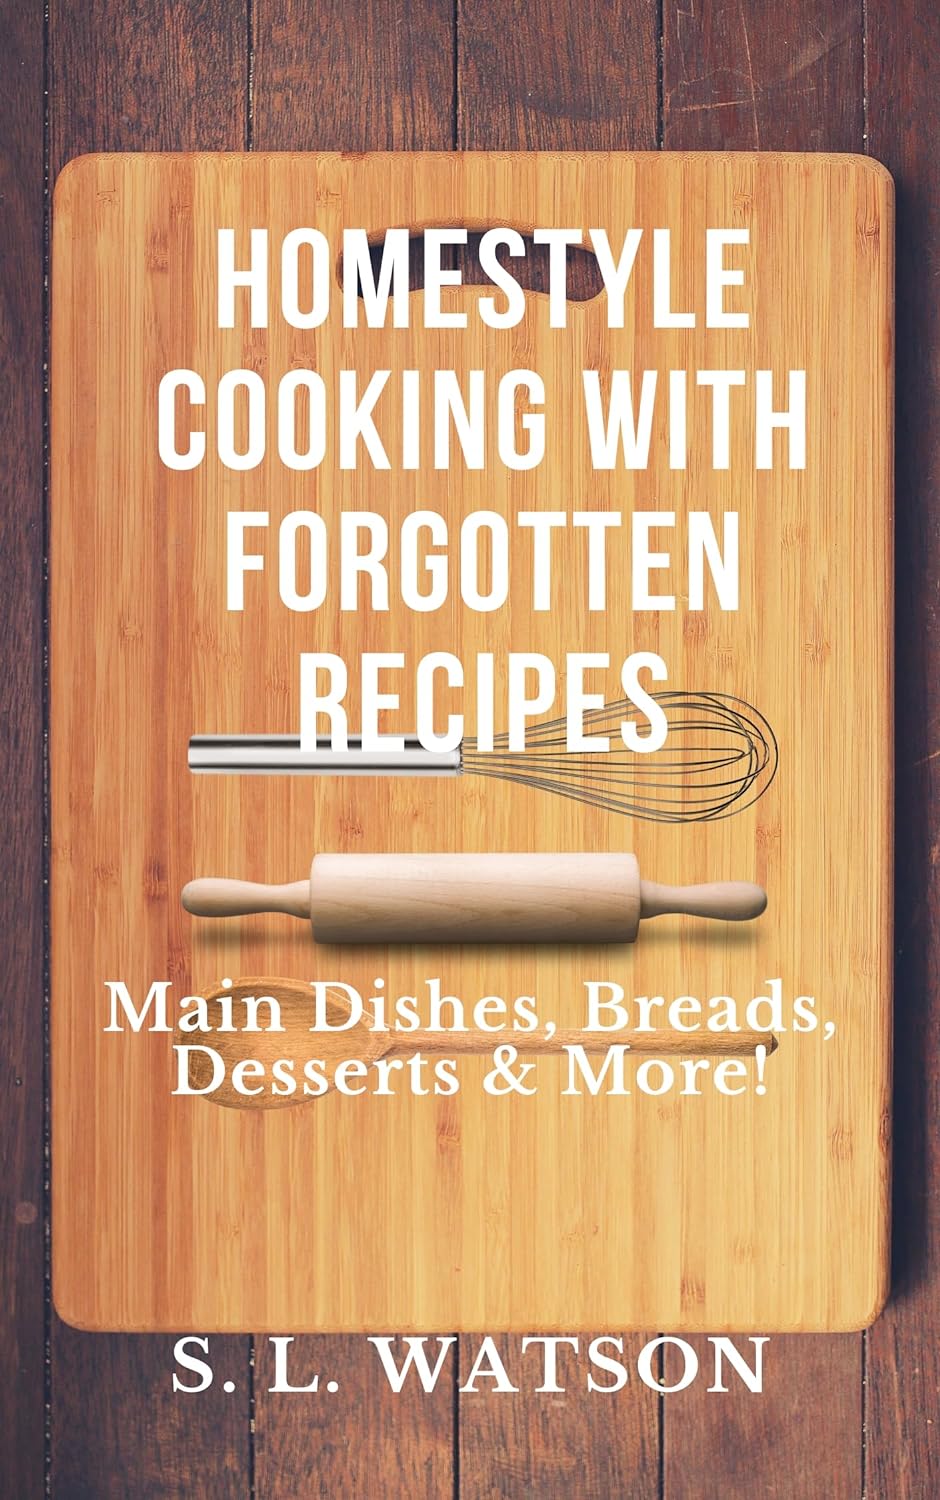 Homestyle Cooking With Forgotten Recipes: Main Dishes, Breads, Desserts  More! (Southern Cooking Recipes)     Kindle Edition